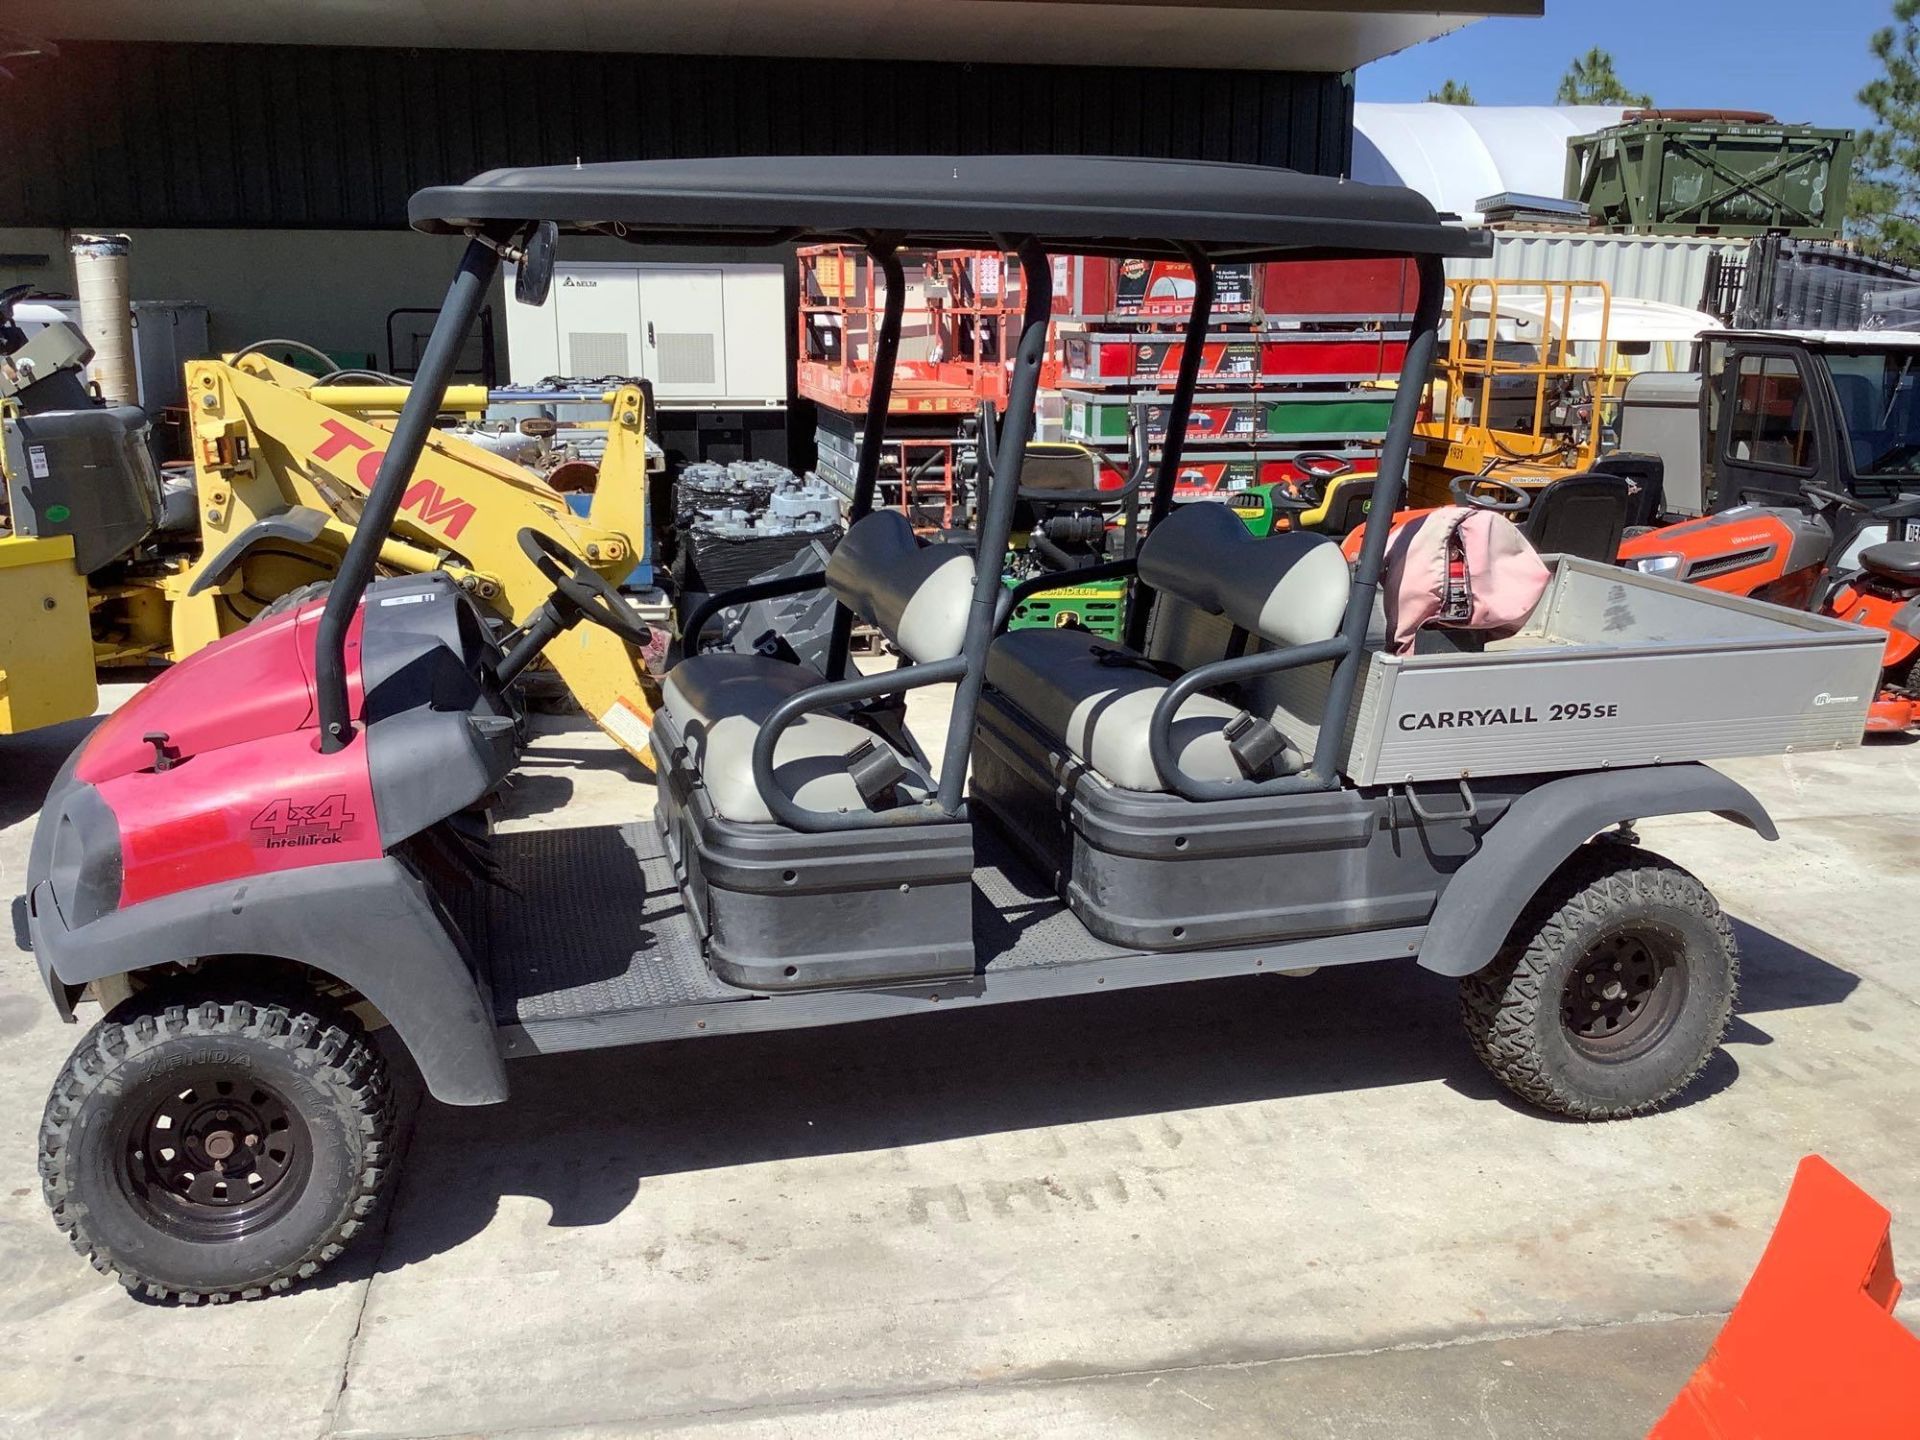 CLUB CAR CARYALL 295SE 4x4 INTELLITRAK GOLF CART, GAS POWERED , MANUAL DUMP BED, HITCH IN FRONT & BA - Image 11 of 19